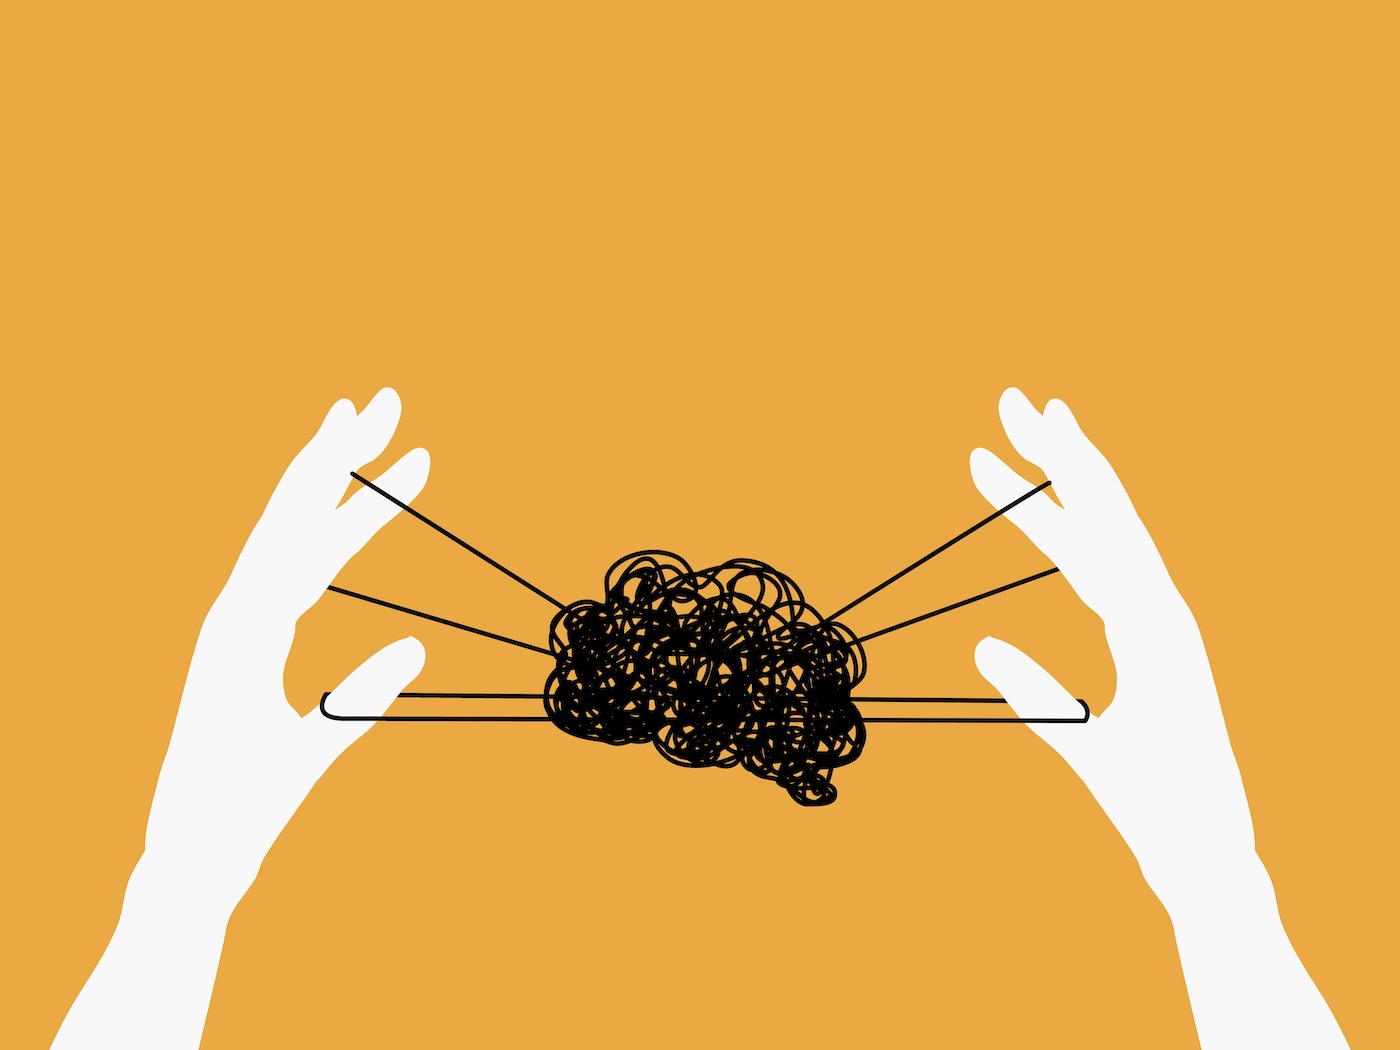 An illustration of a pair of hands playing cat's cradle with strings that form a brain-shaped knot.